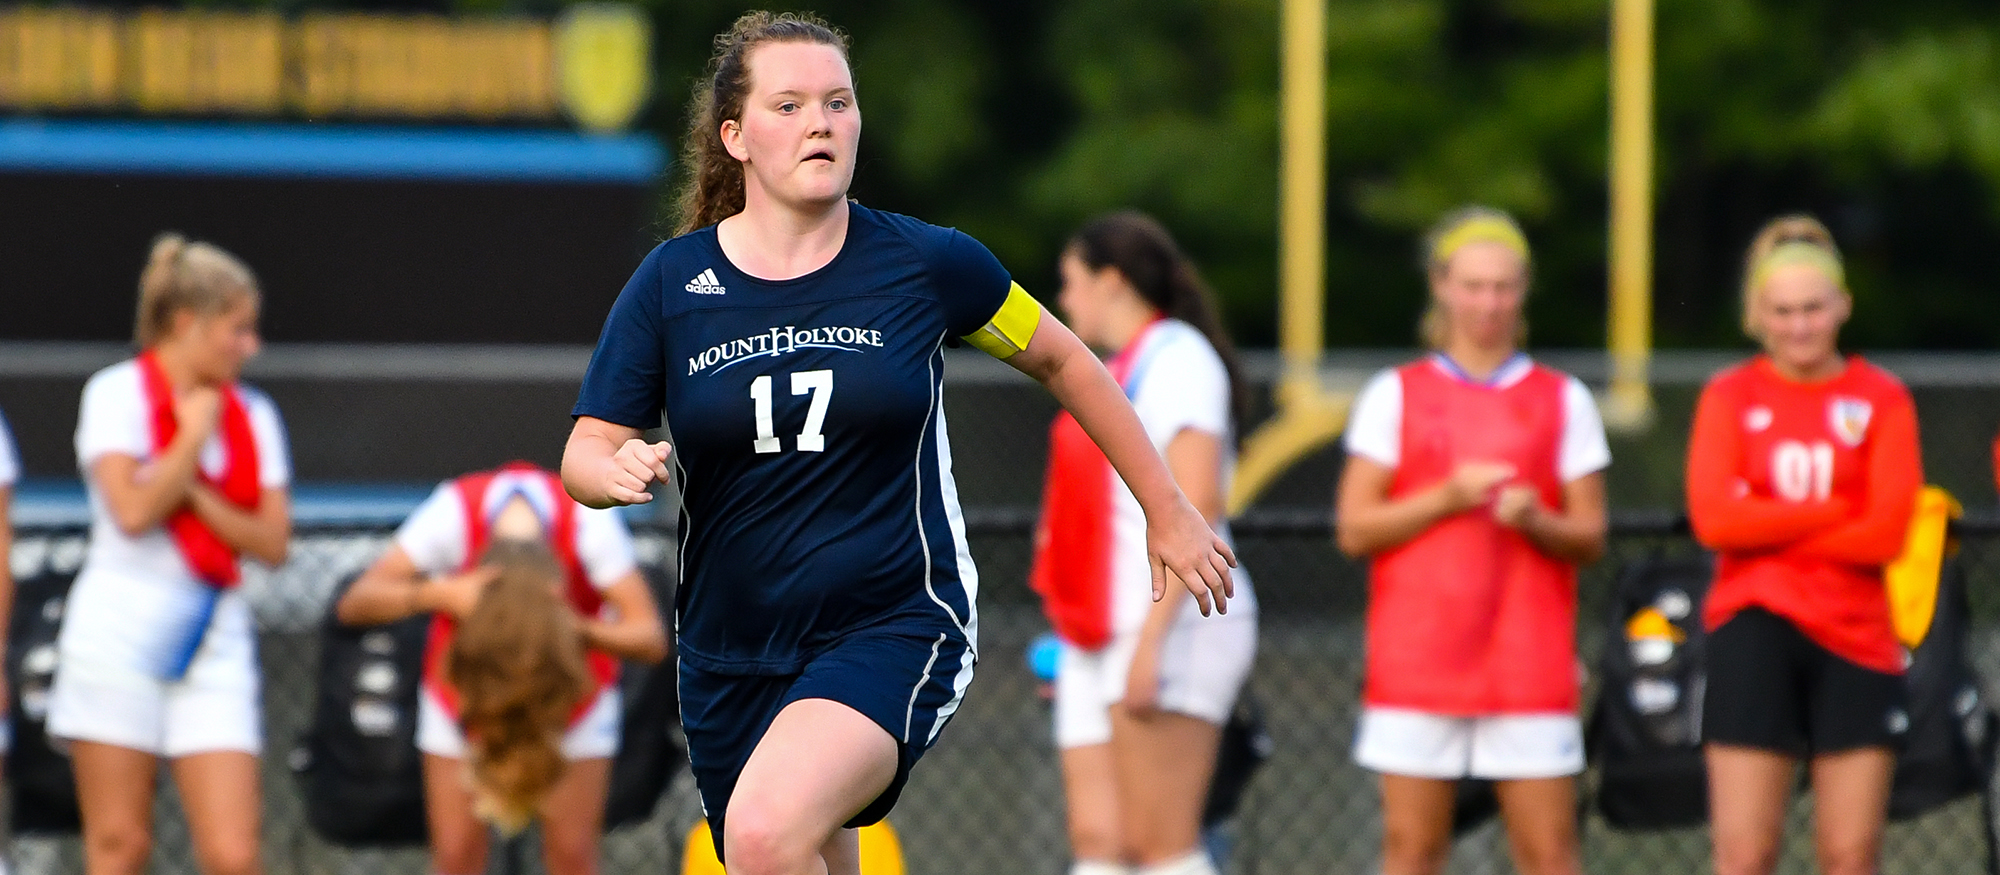 Soccer Closes Season With 5-0 Loss to Babson in NEWMAC Play